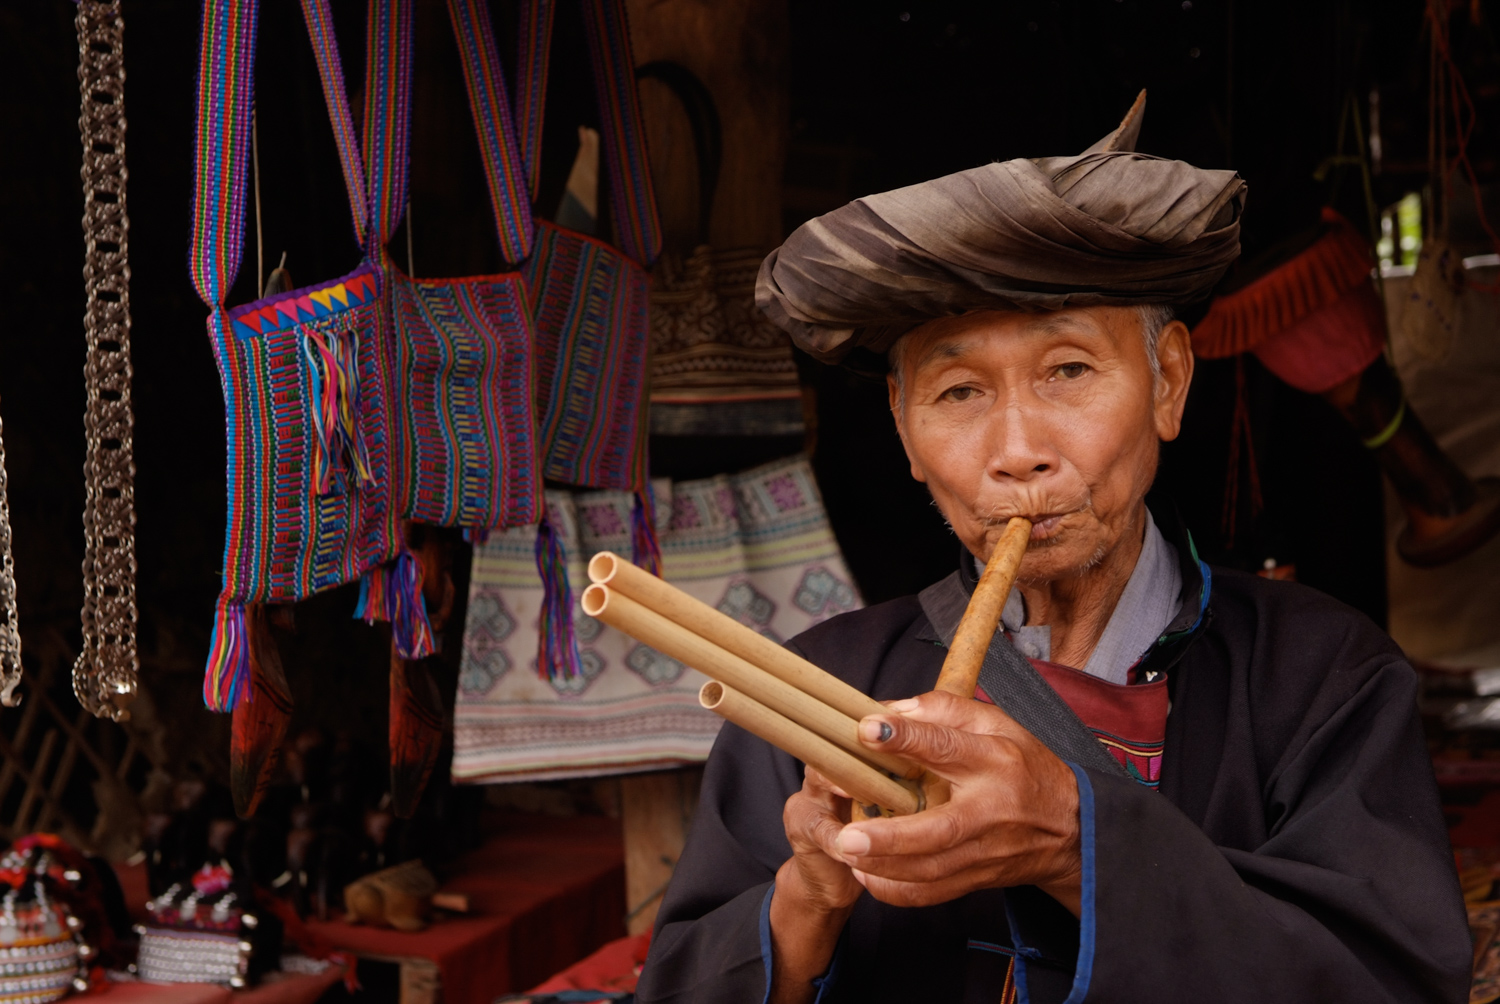 Hill tribesman playing bamboo flute in Laos